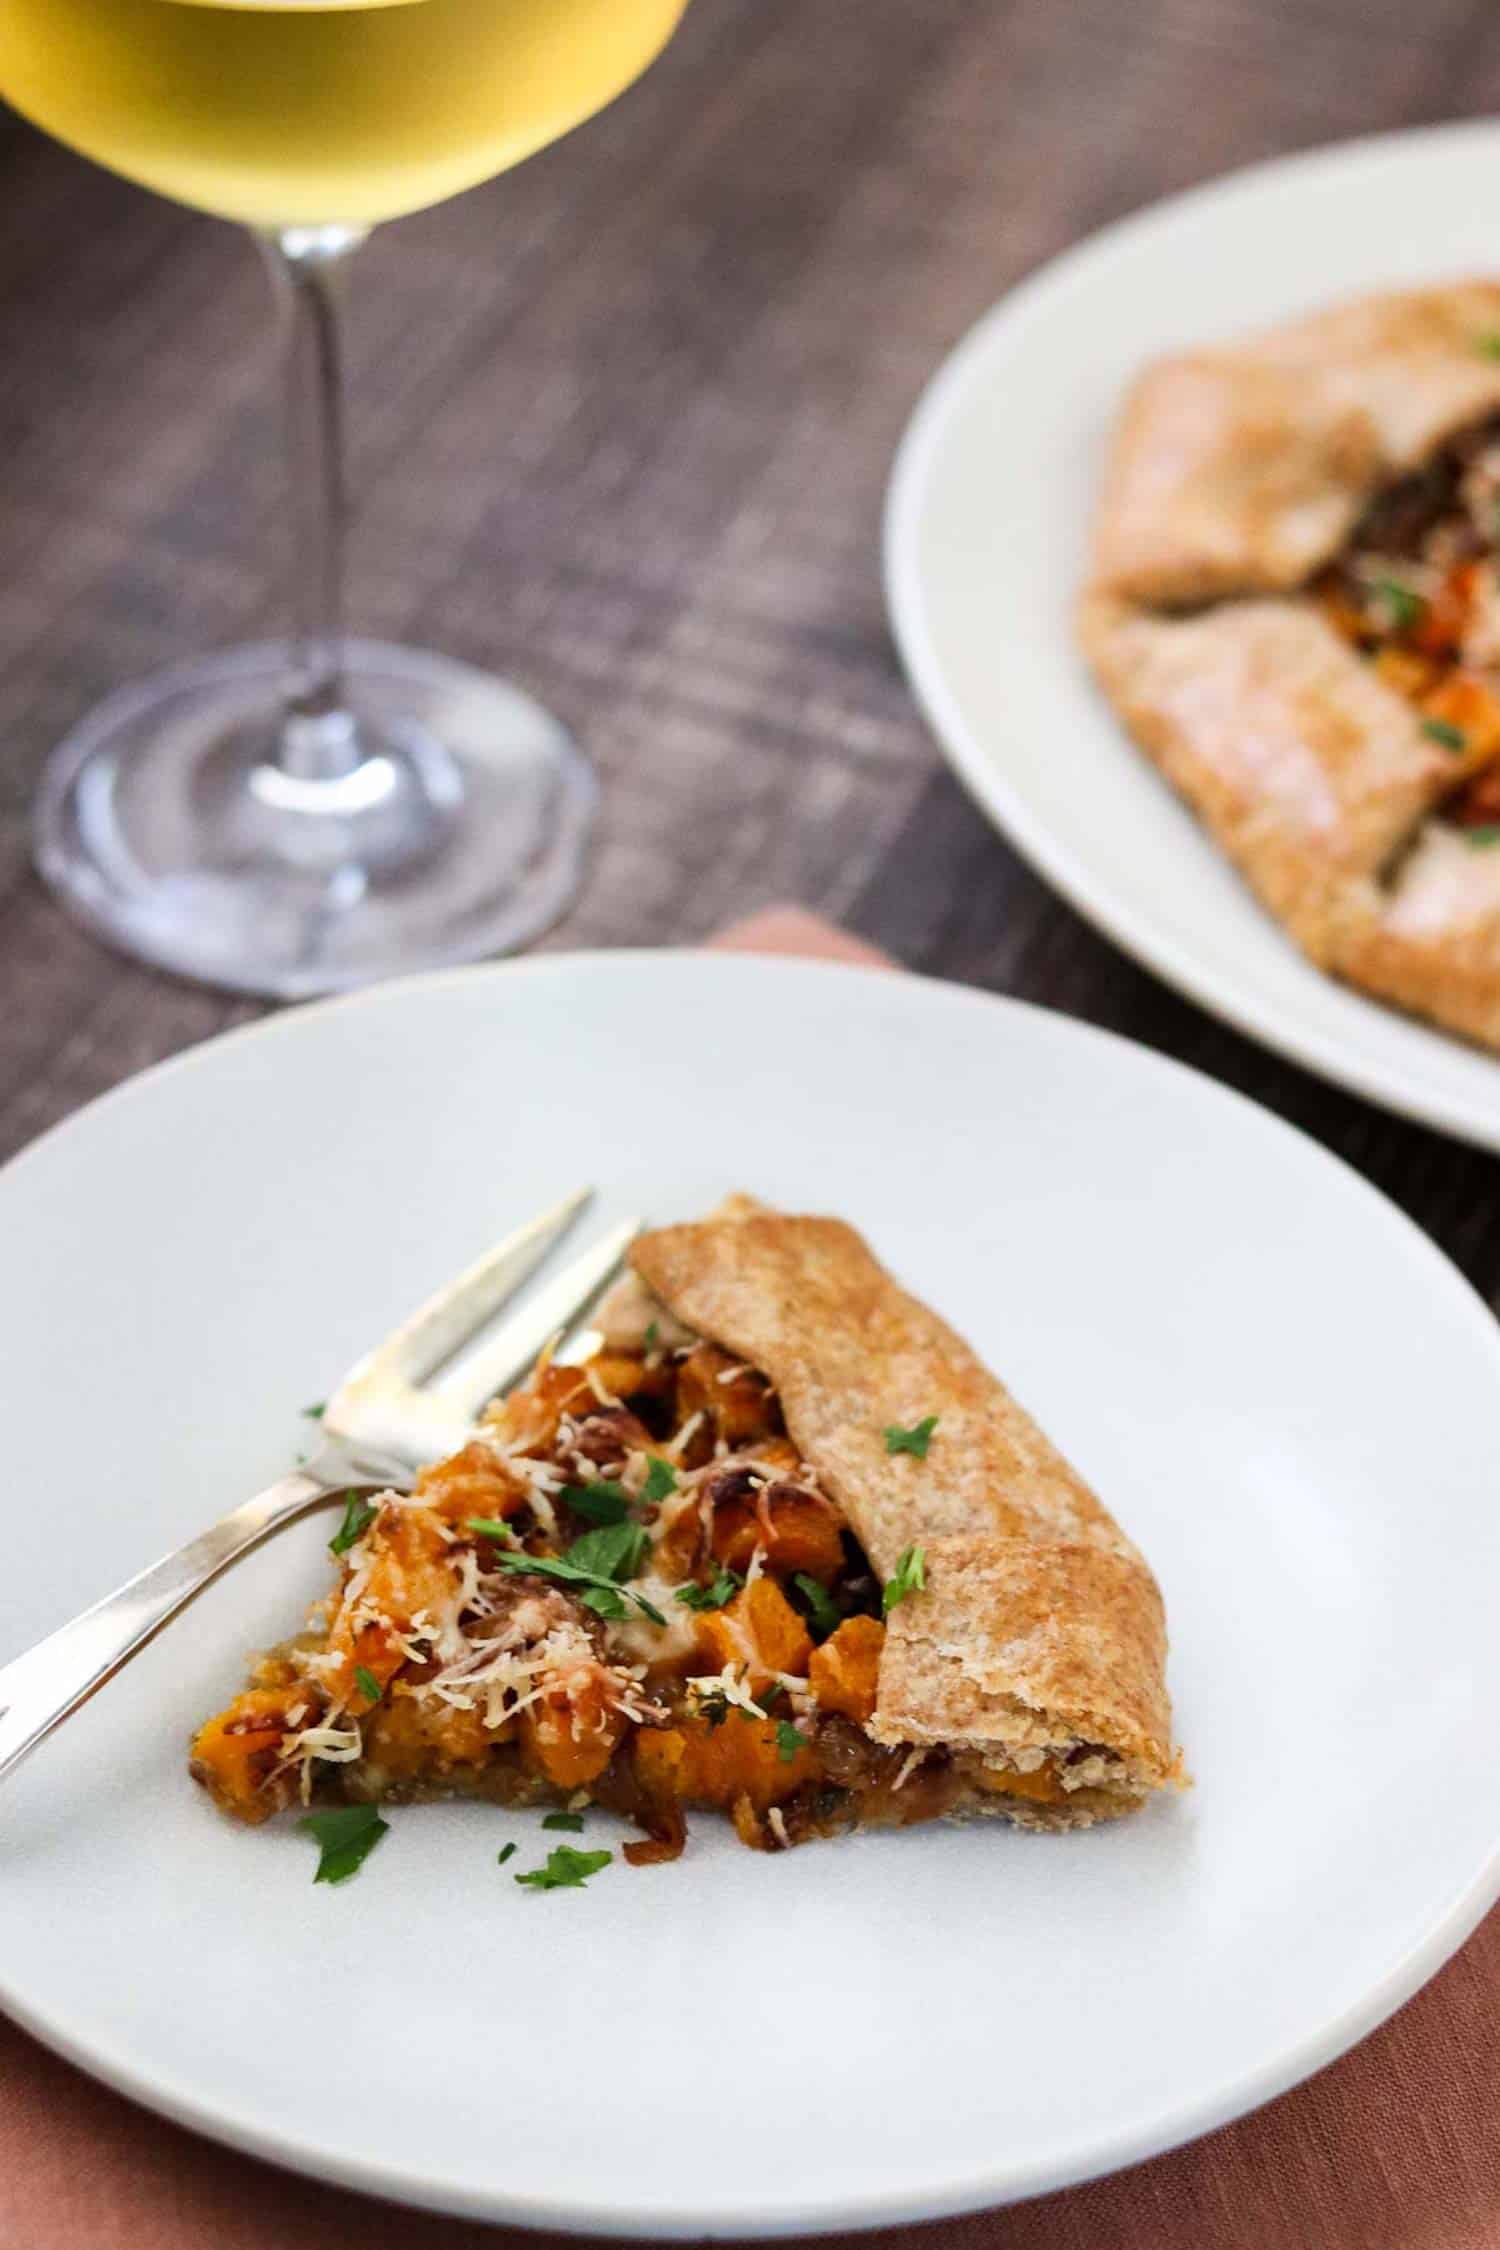 Slice of Butternut Squash Galette on a white plate with a fork and white wine.